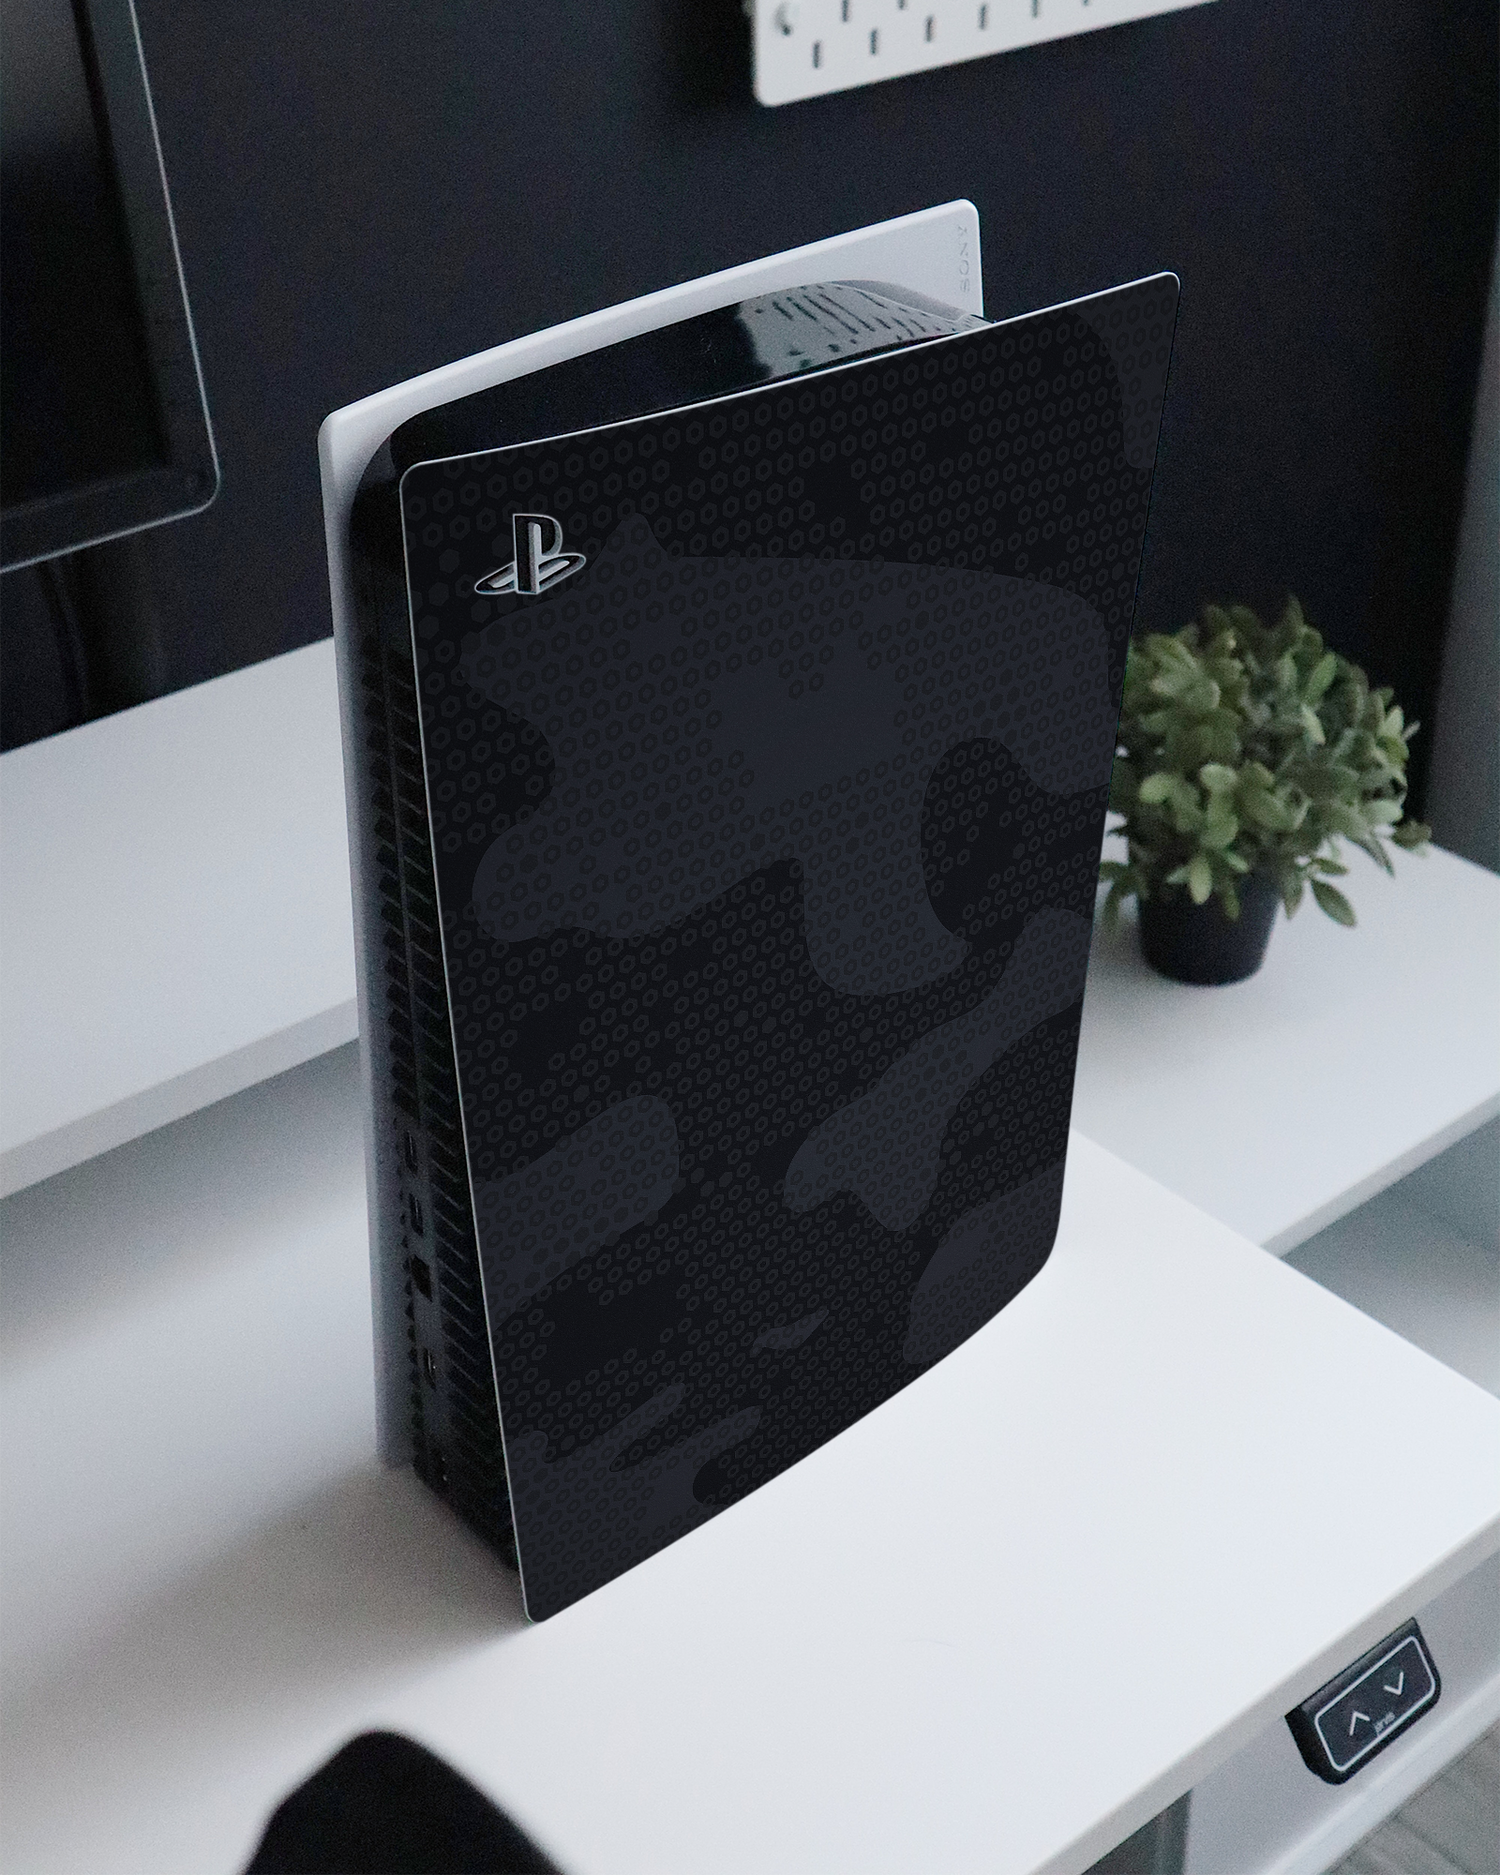 Spec Ops Dark Console Skin for Sony PlayStation 5 Digital Edition standing on a sideboard 